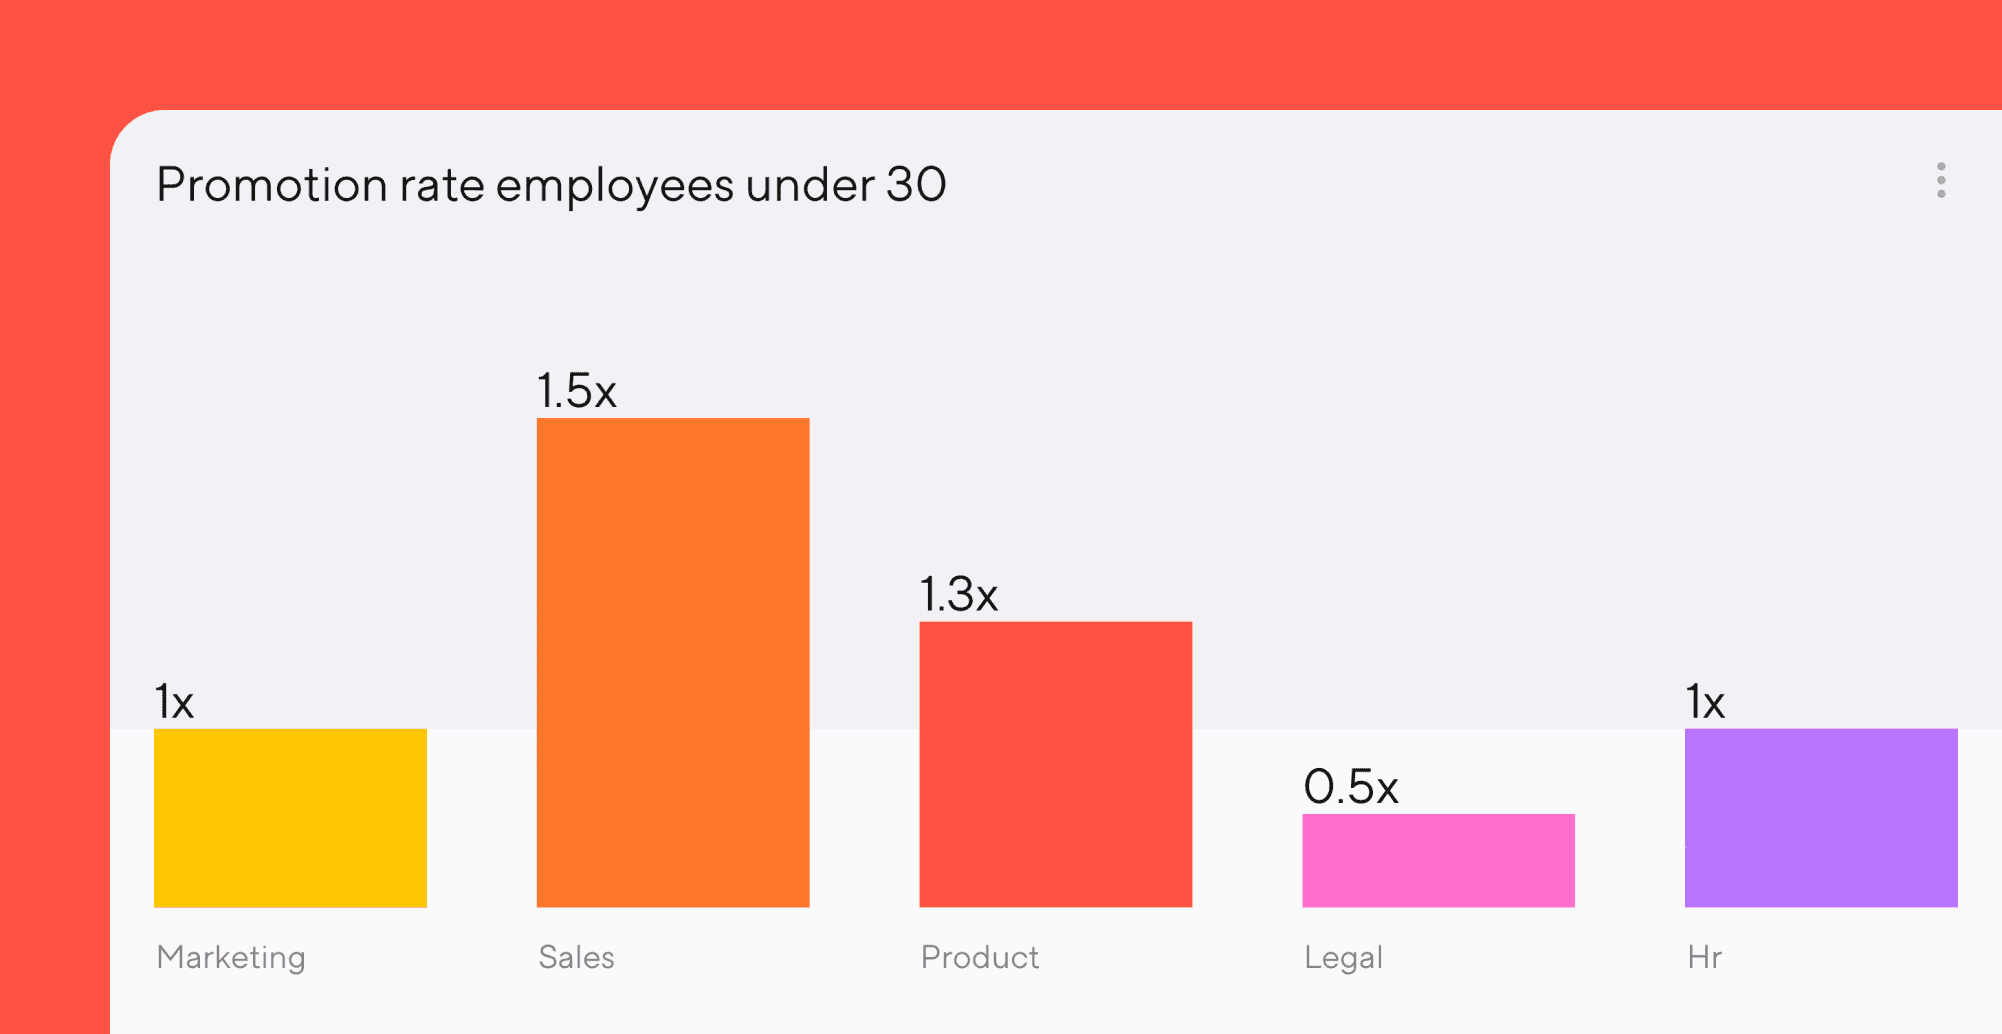 Bar graph titled Promotion rate employees under 30, with categories for Marketing at 1x, Sales at 1.5x, Product at 1.3x, Legal at 0.5x, and Hr at 1x.